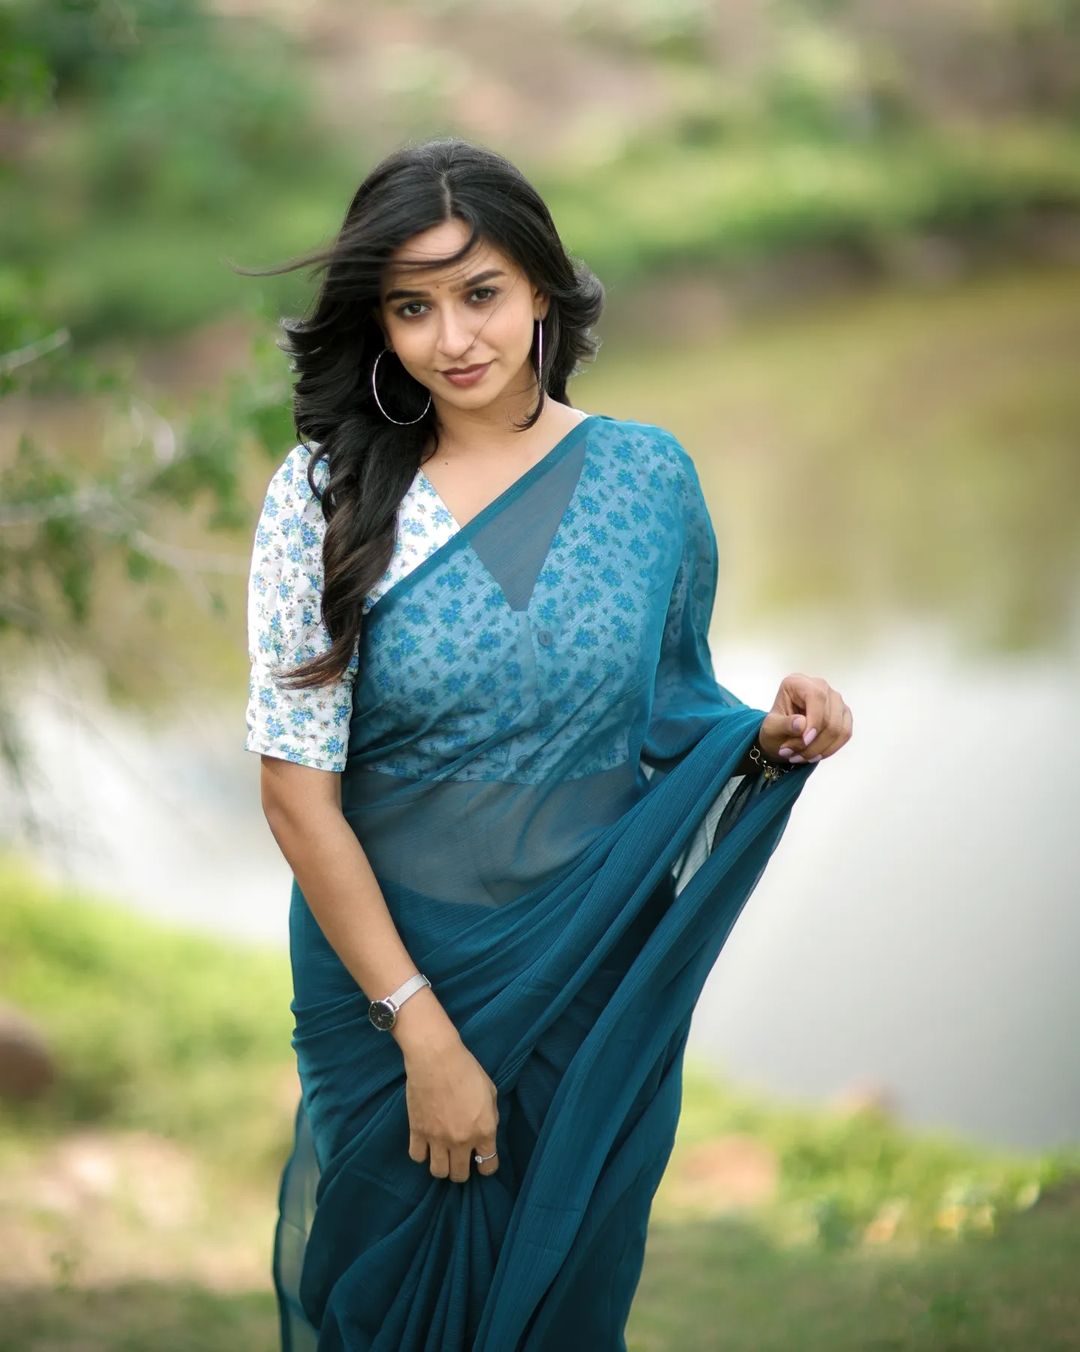 Actress divya ganesan these pictures looking traditional-Actressdivya, Divya Ganesan Photos,Spicy Hot Pics,Images,High Resolution WallPapers Download